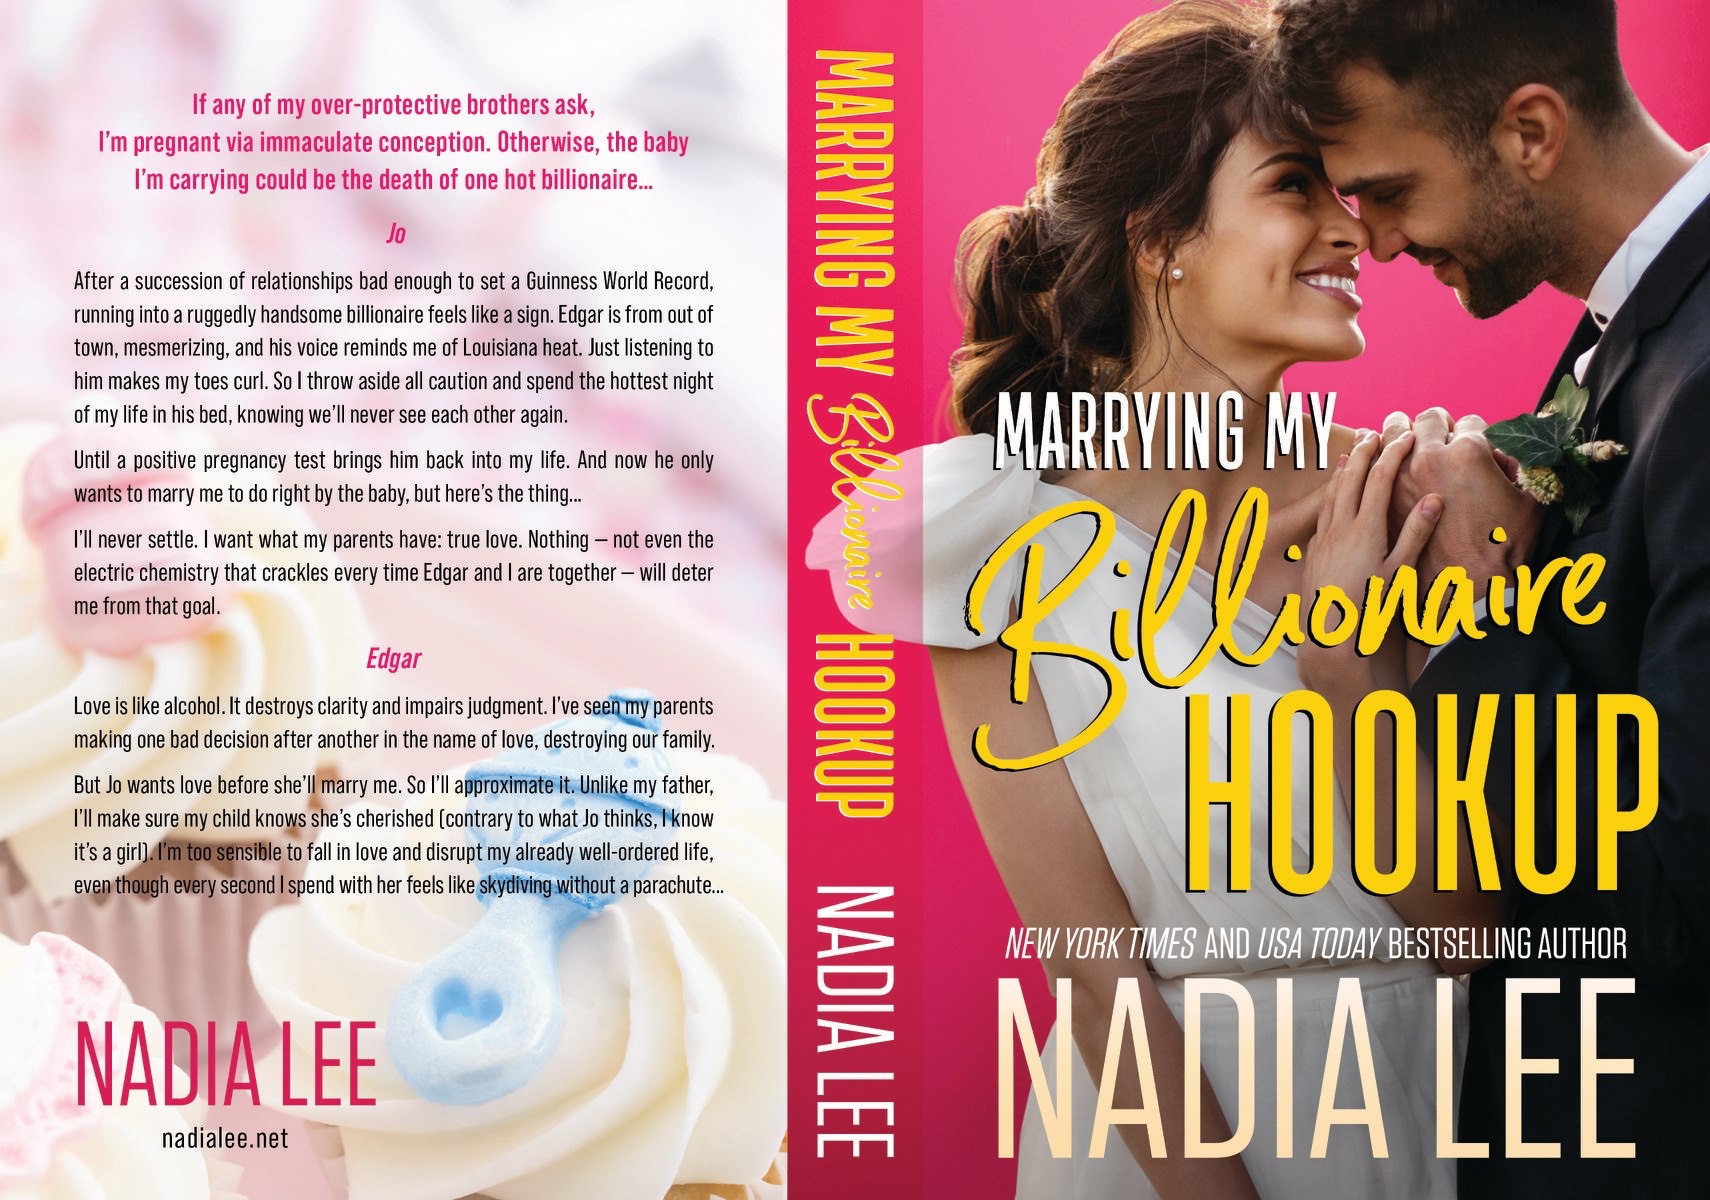 REVIEW: Marrying My Billionaire Hookup by Nadia Lee – Jeeves Reads Romance